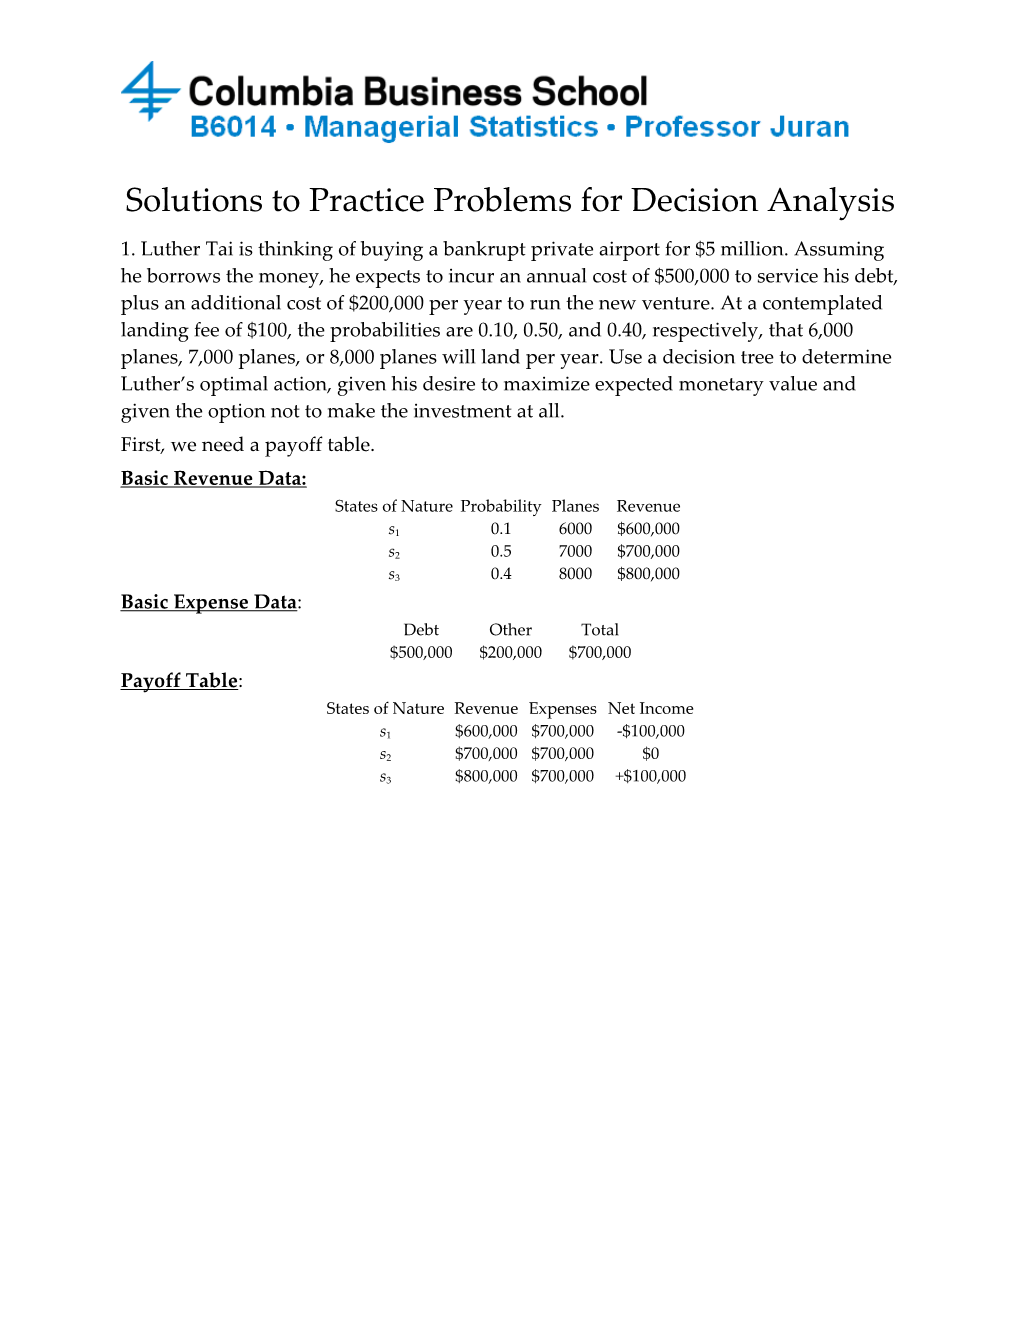 Solutions to Practice Problems for Decision Analysis